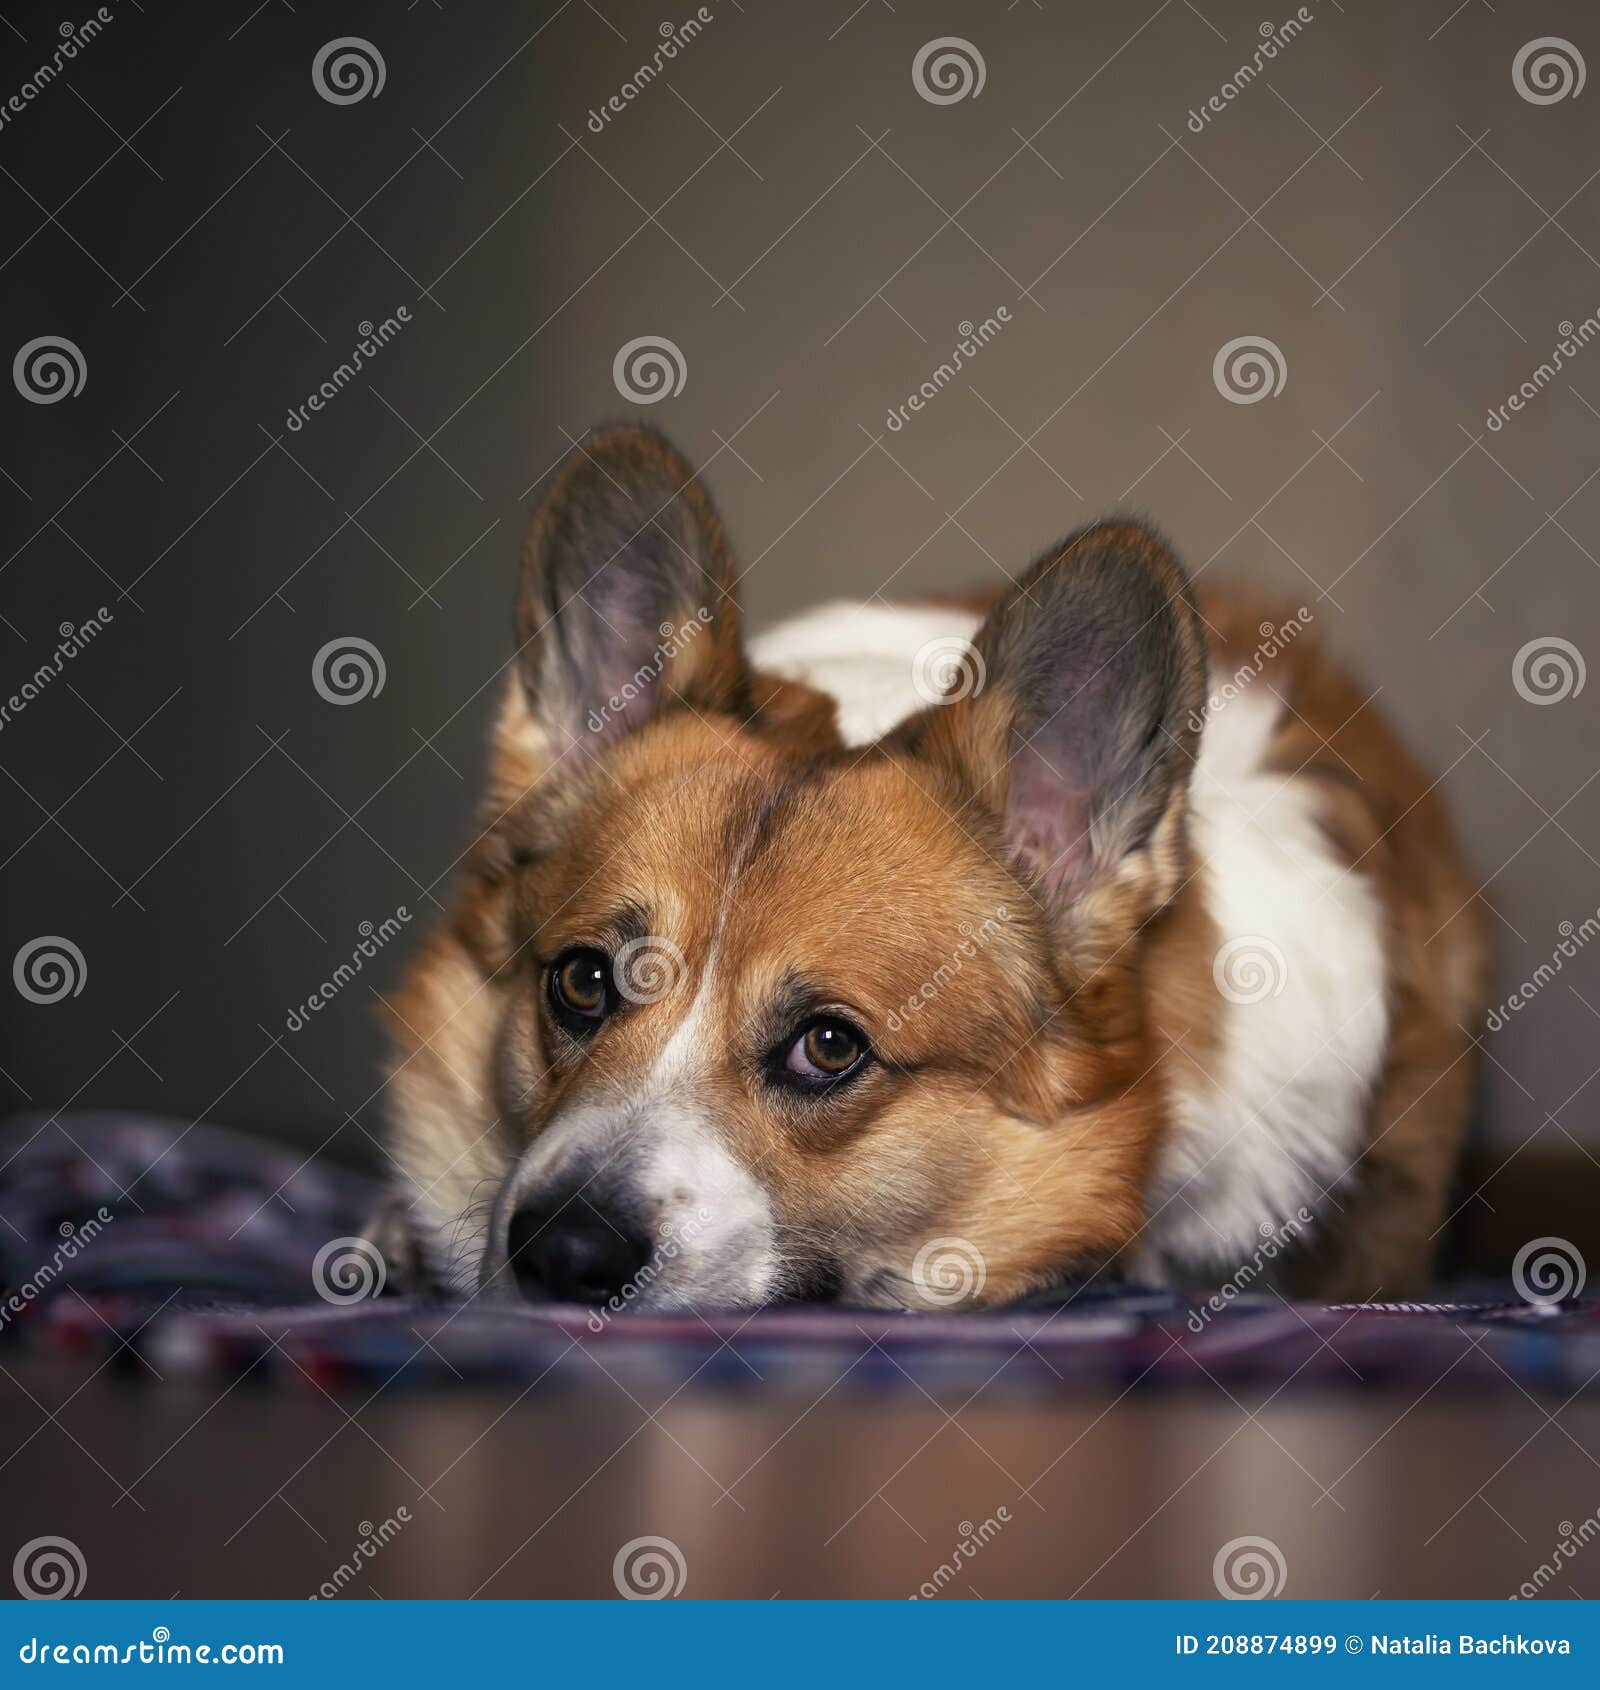 Cute dog corgi lies on the floor and looks sadly waiting for the arrival of the owner